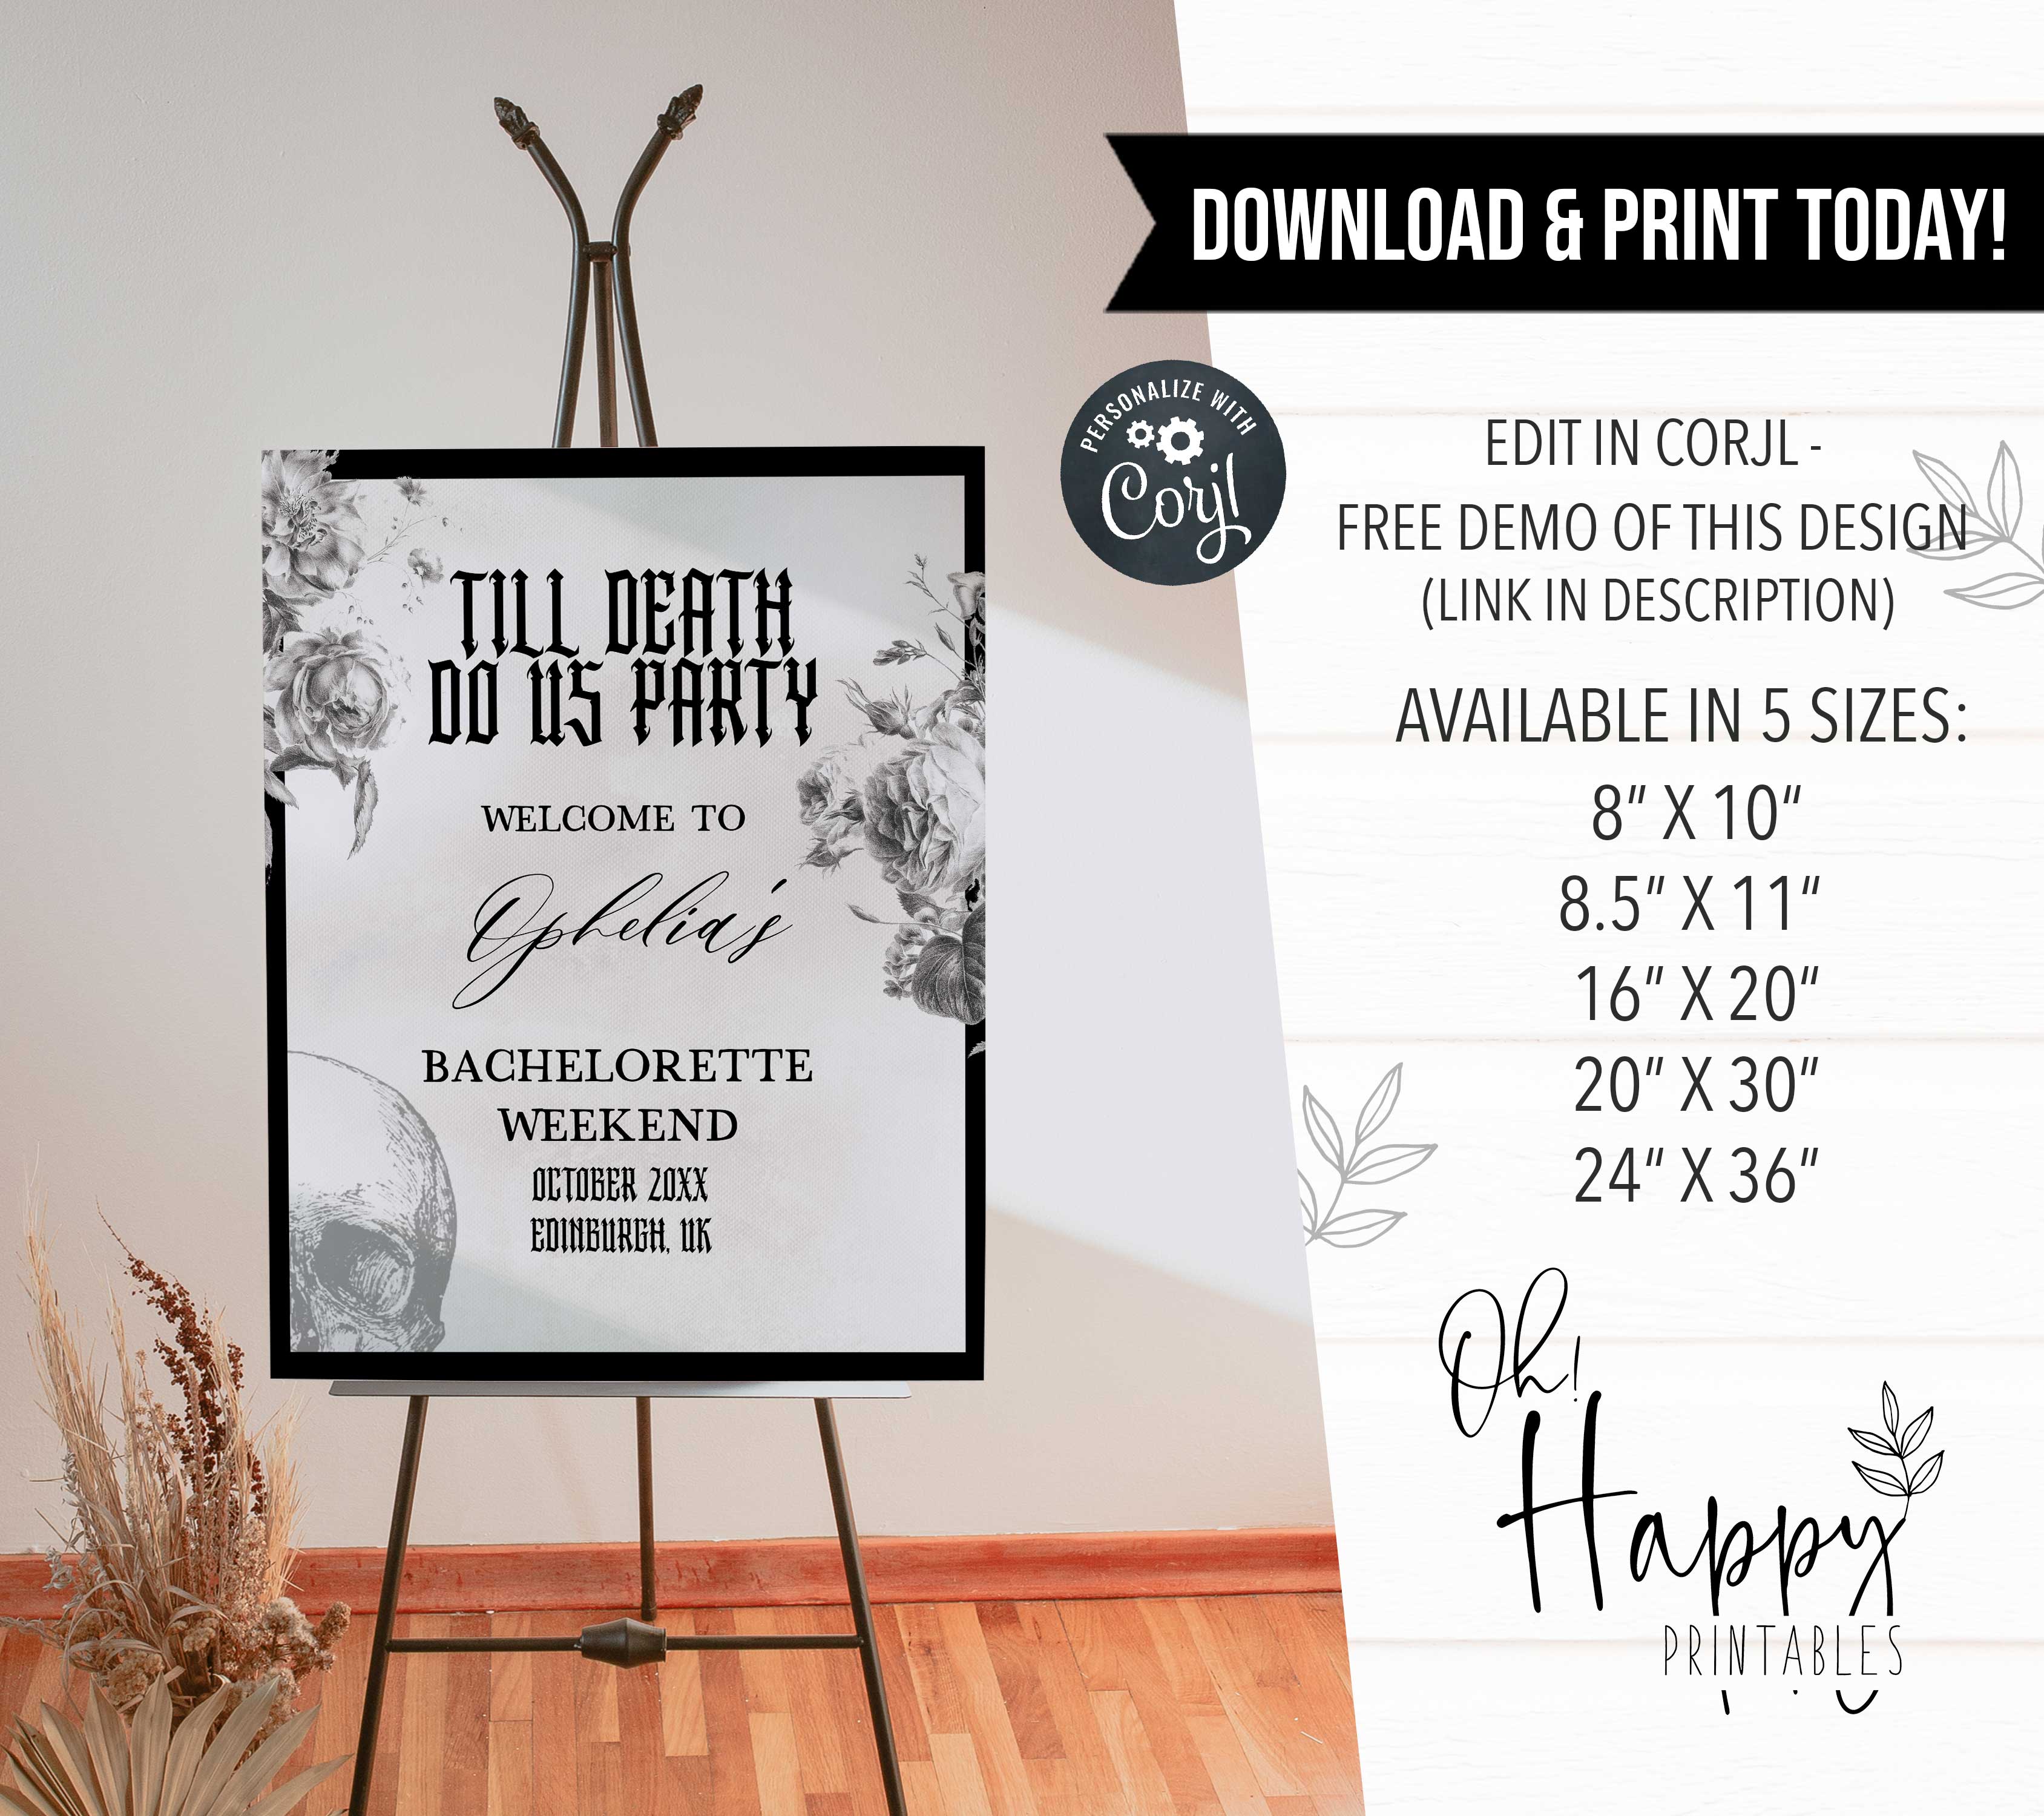 Fully editable and printable bachelorette weekend welcome sign with a gothic design. Perfect for a Bride or Die or Death Us To Party bridal shower themed party